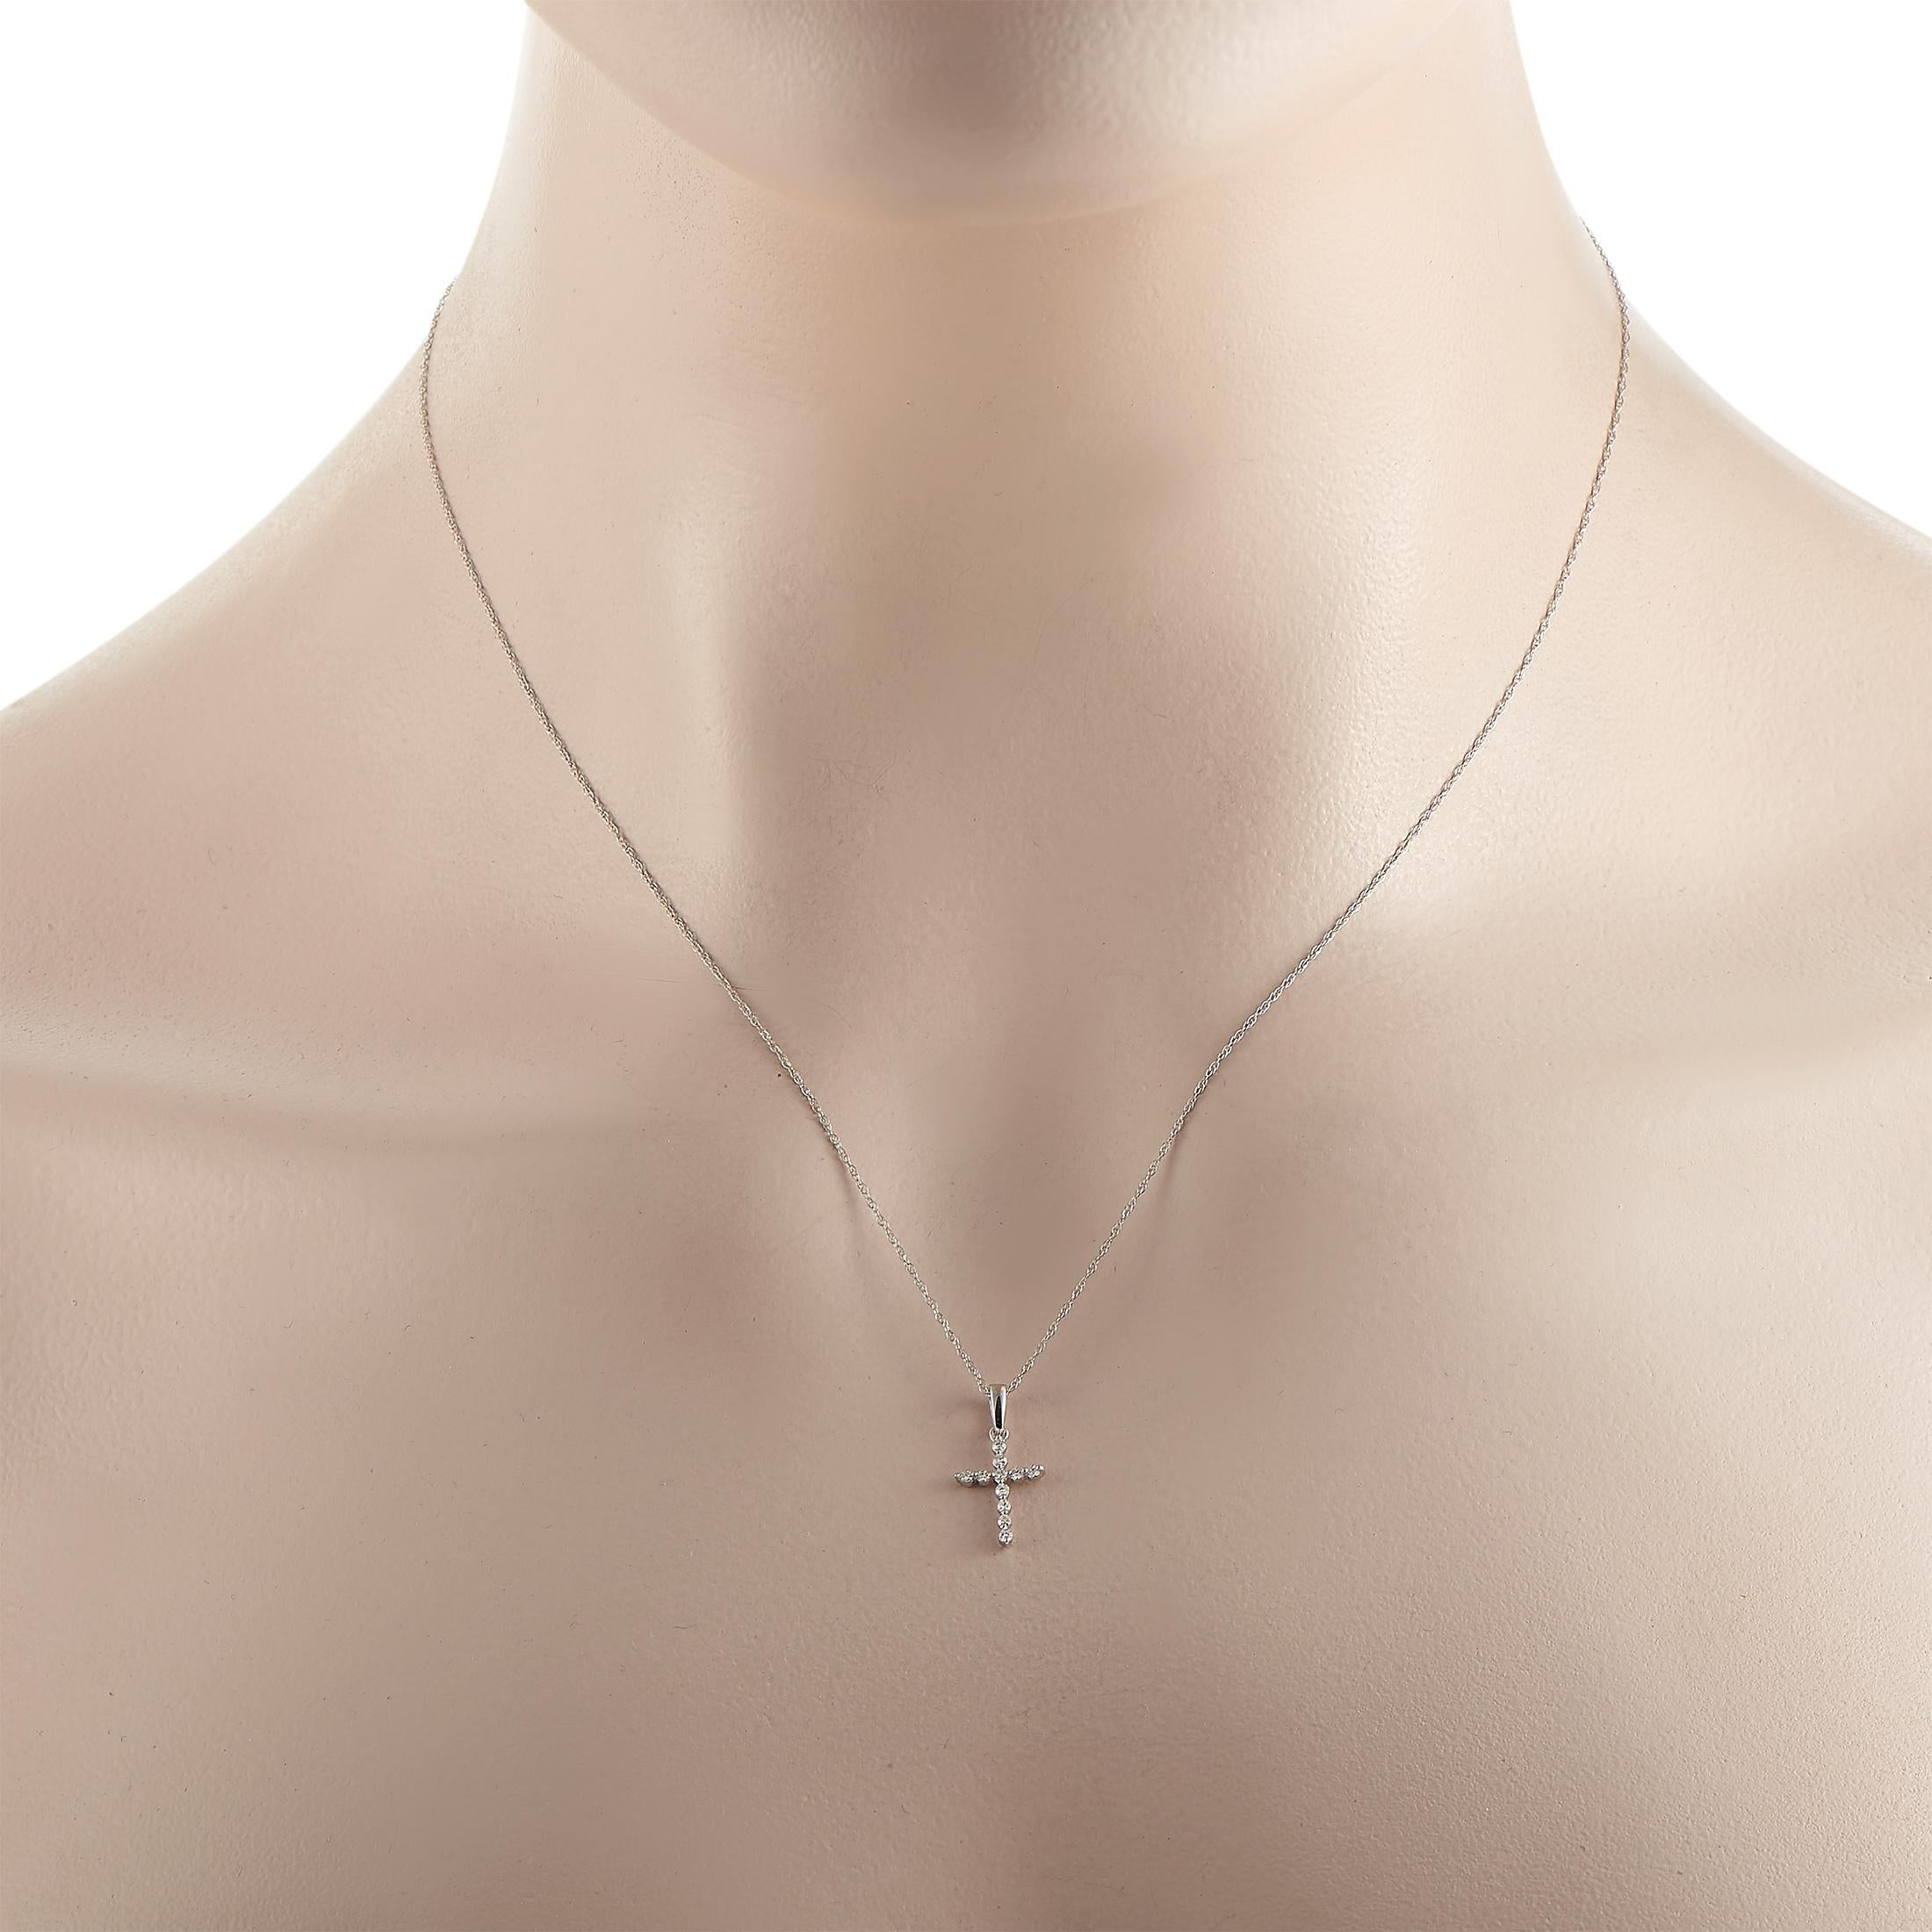 This stylish symbol of faith will continually sparkle and shine. On this impeccably designed necklace, a cross-shaped pendant measuring 0.75” long and 0.37” wide is suspended from an 18” chain. It’s crafted from 14K White Gold and comes complete